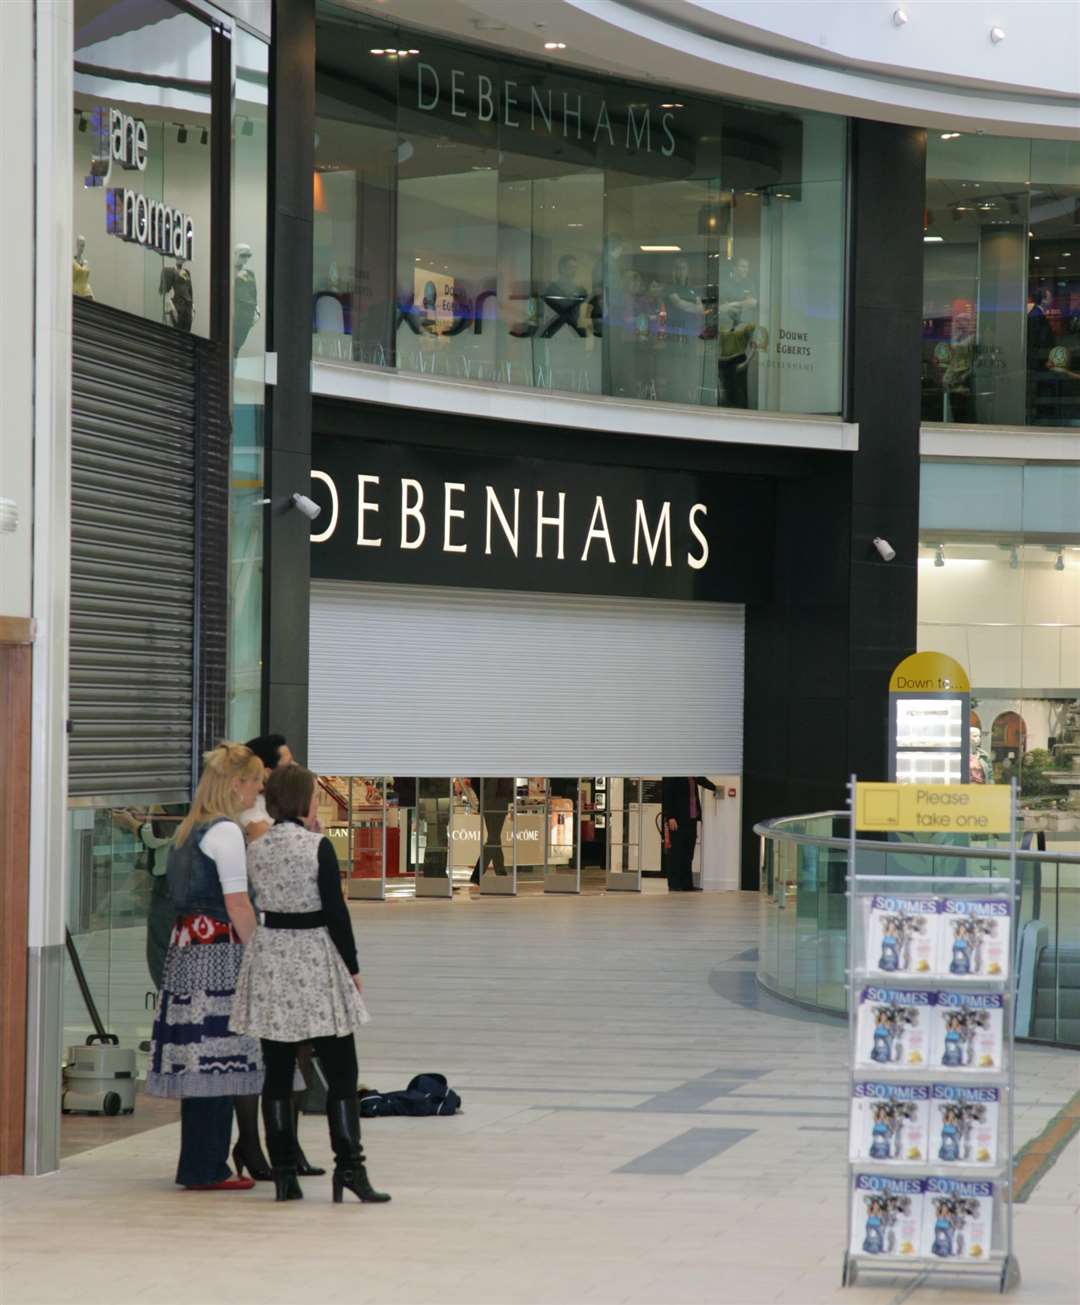 After a delay with the final signing off from fire officers following teething problems with the CCTV system, Debenhams opened its doors for the first time at about 9.45am in March 2008